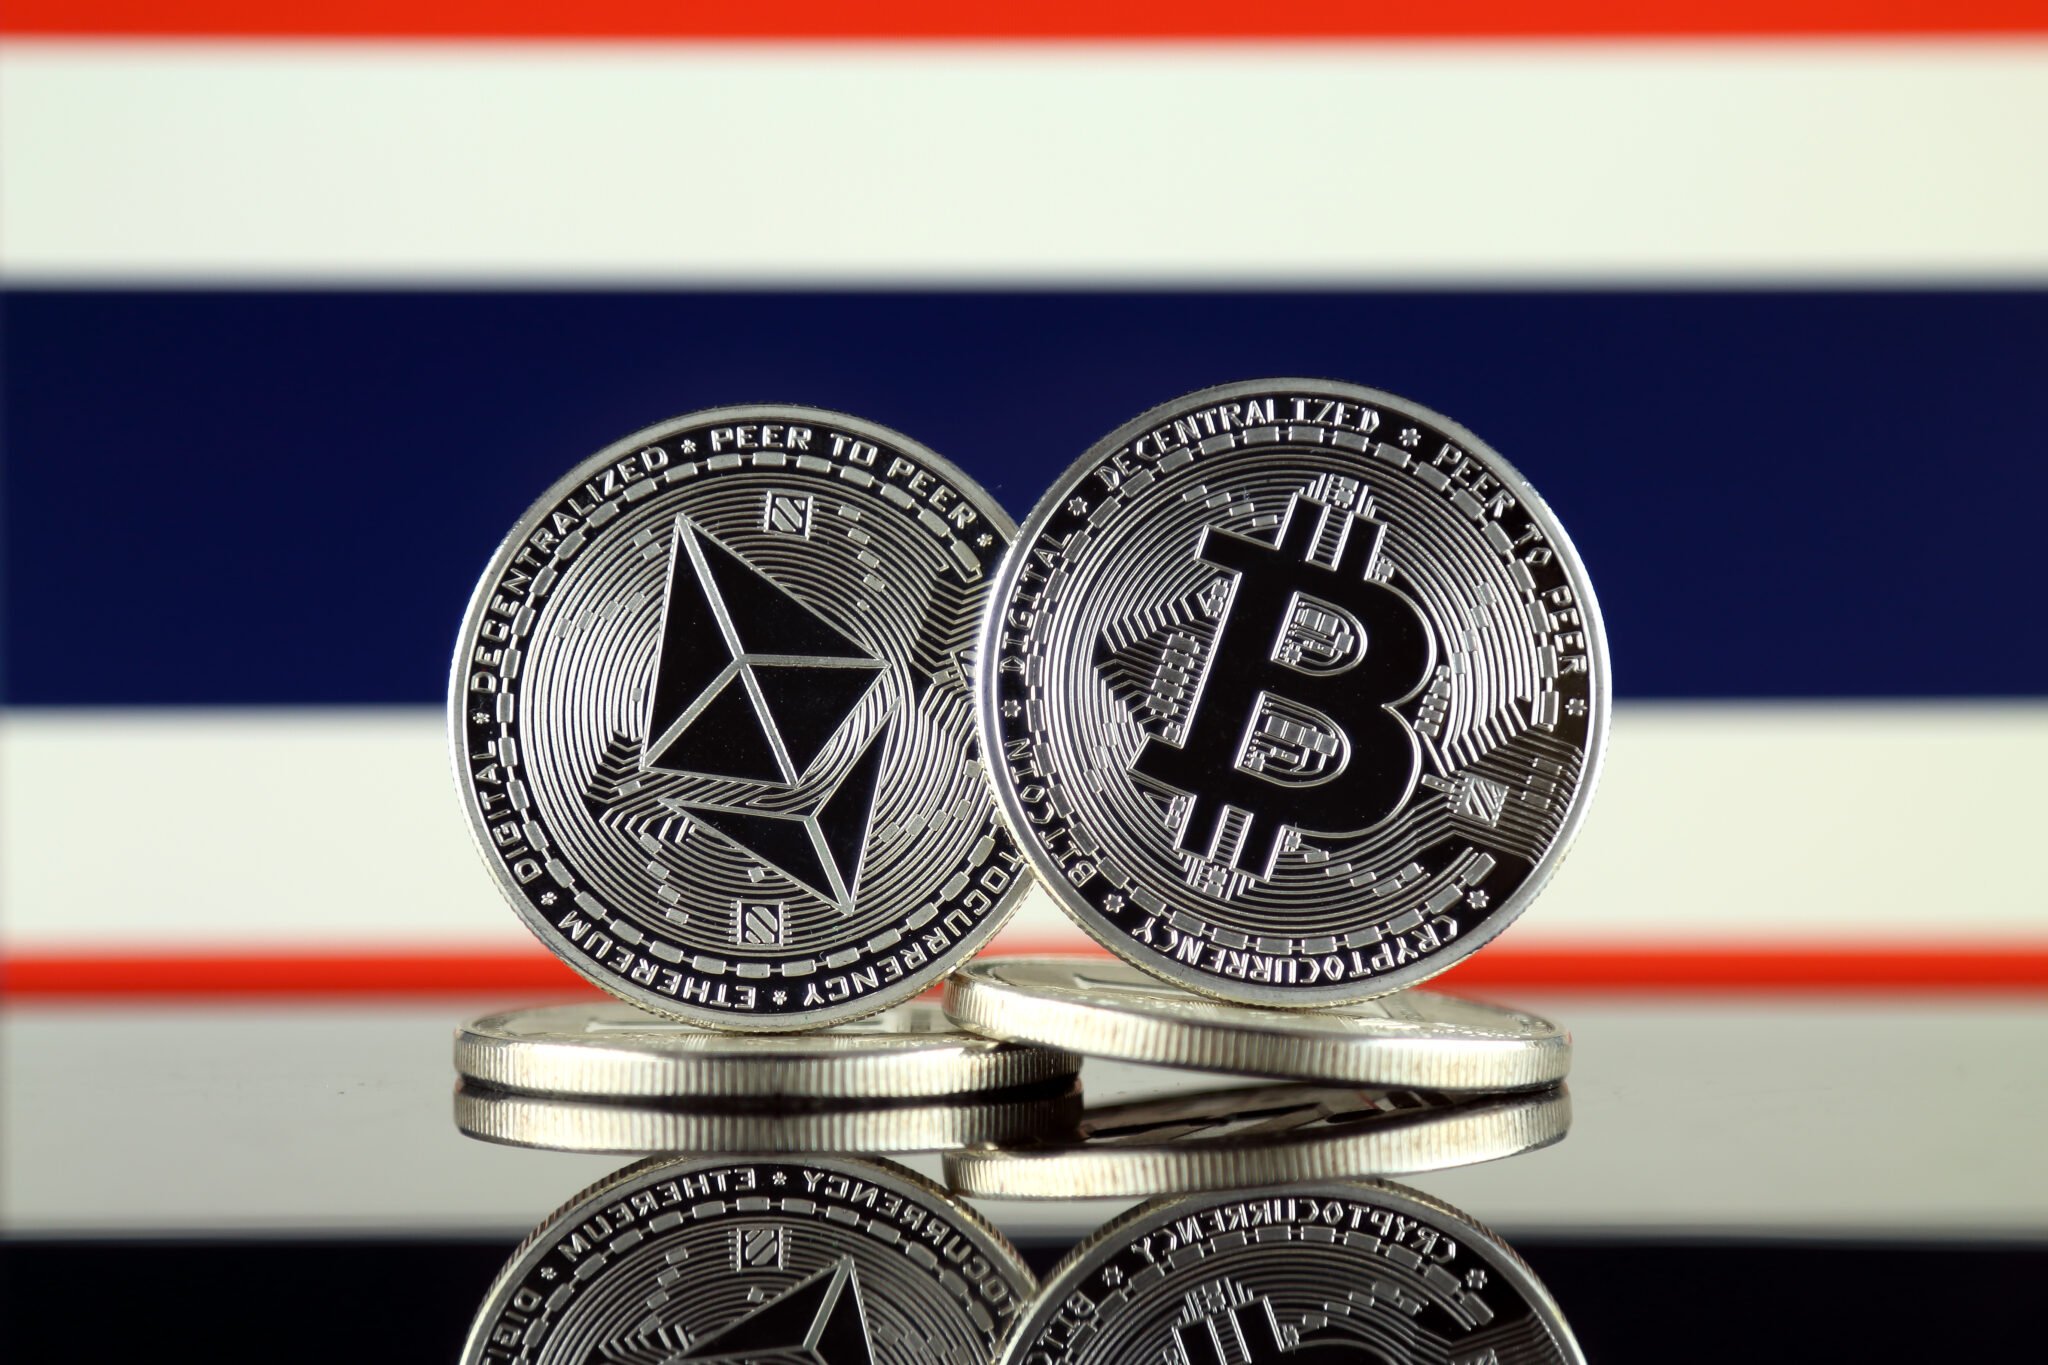 Physical version of Ethereum (ETH), Bitcoin (BTC) and Thailand Flag. 2 largest cryptocurrencies in terms of market capitalization.